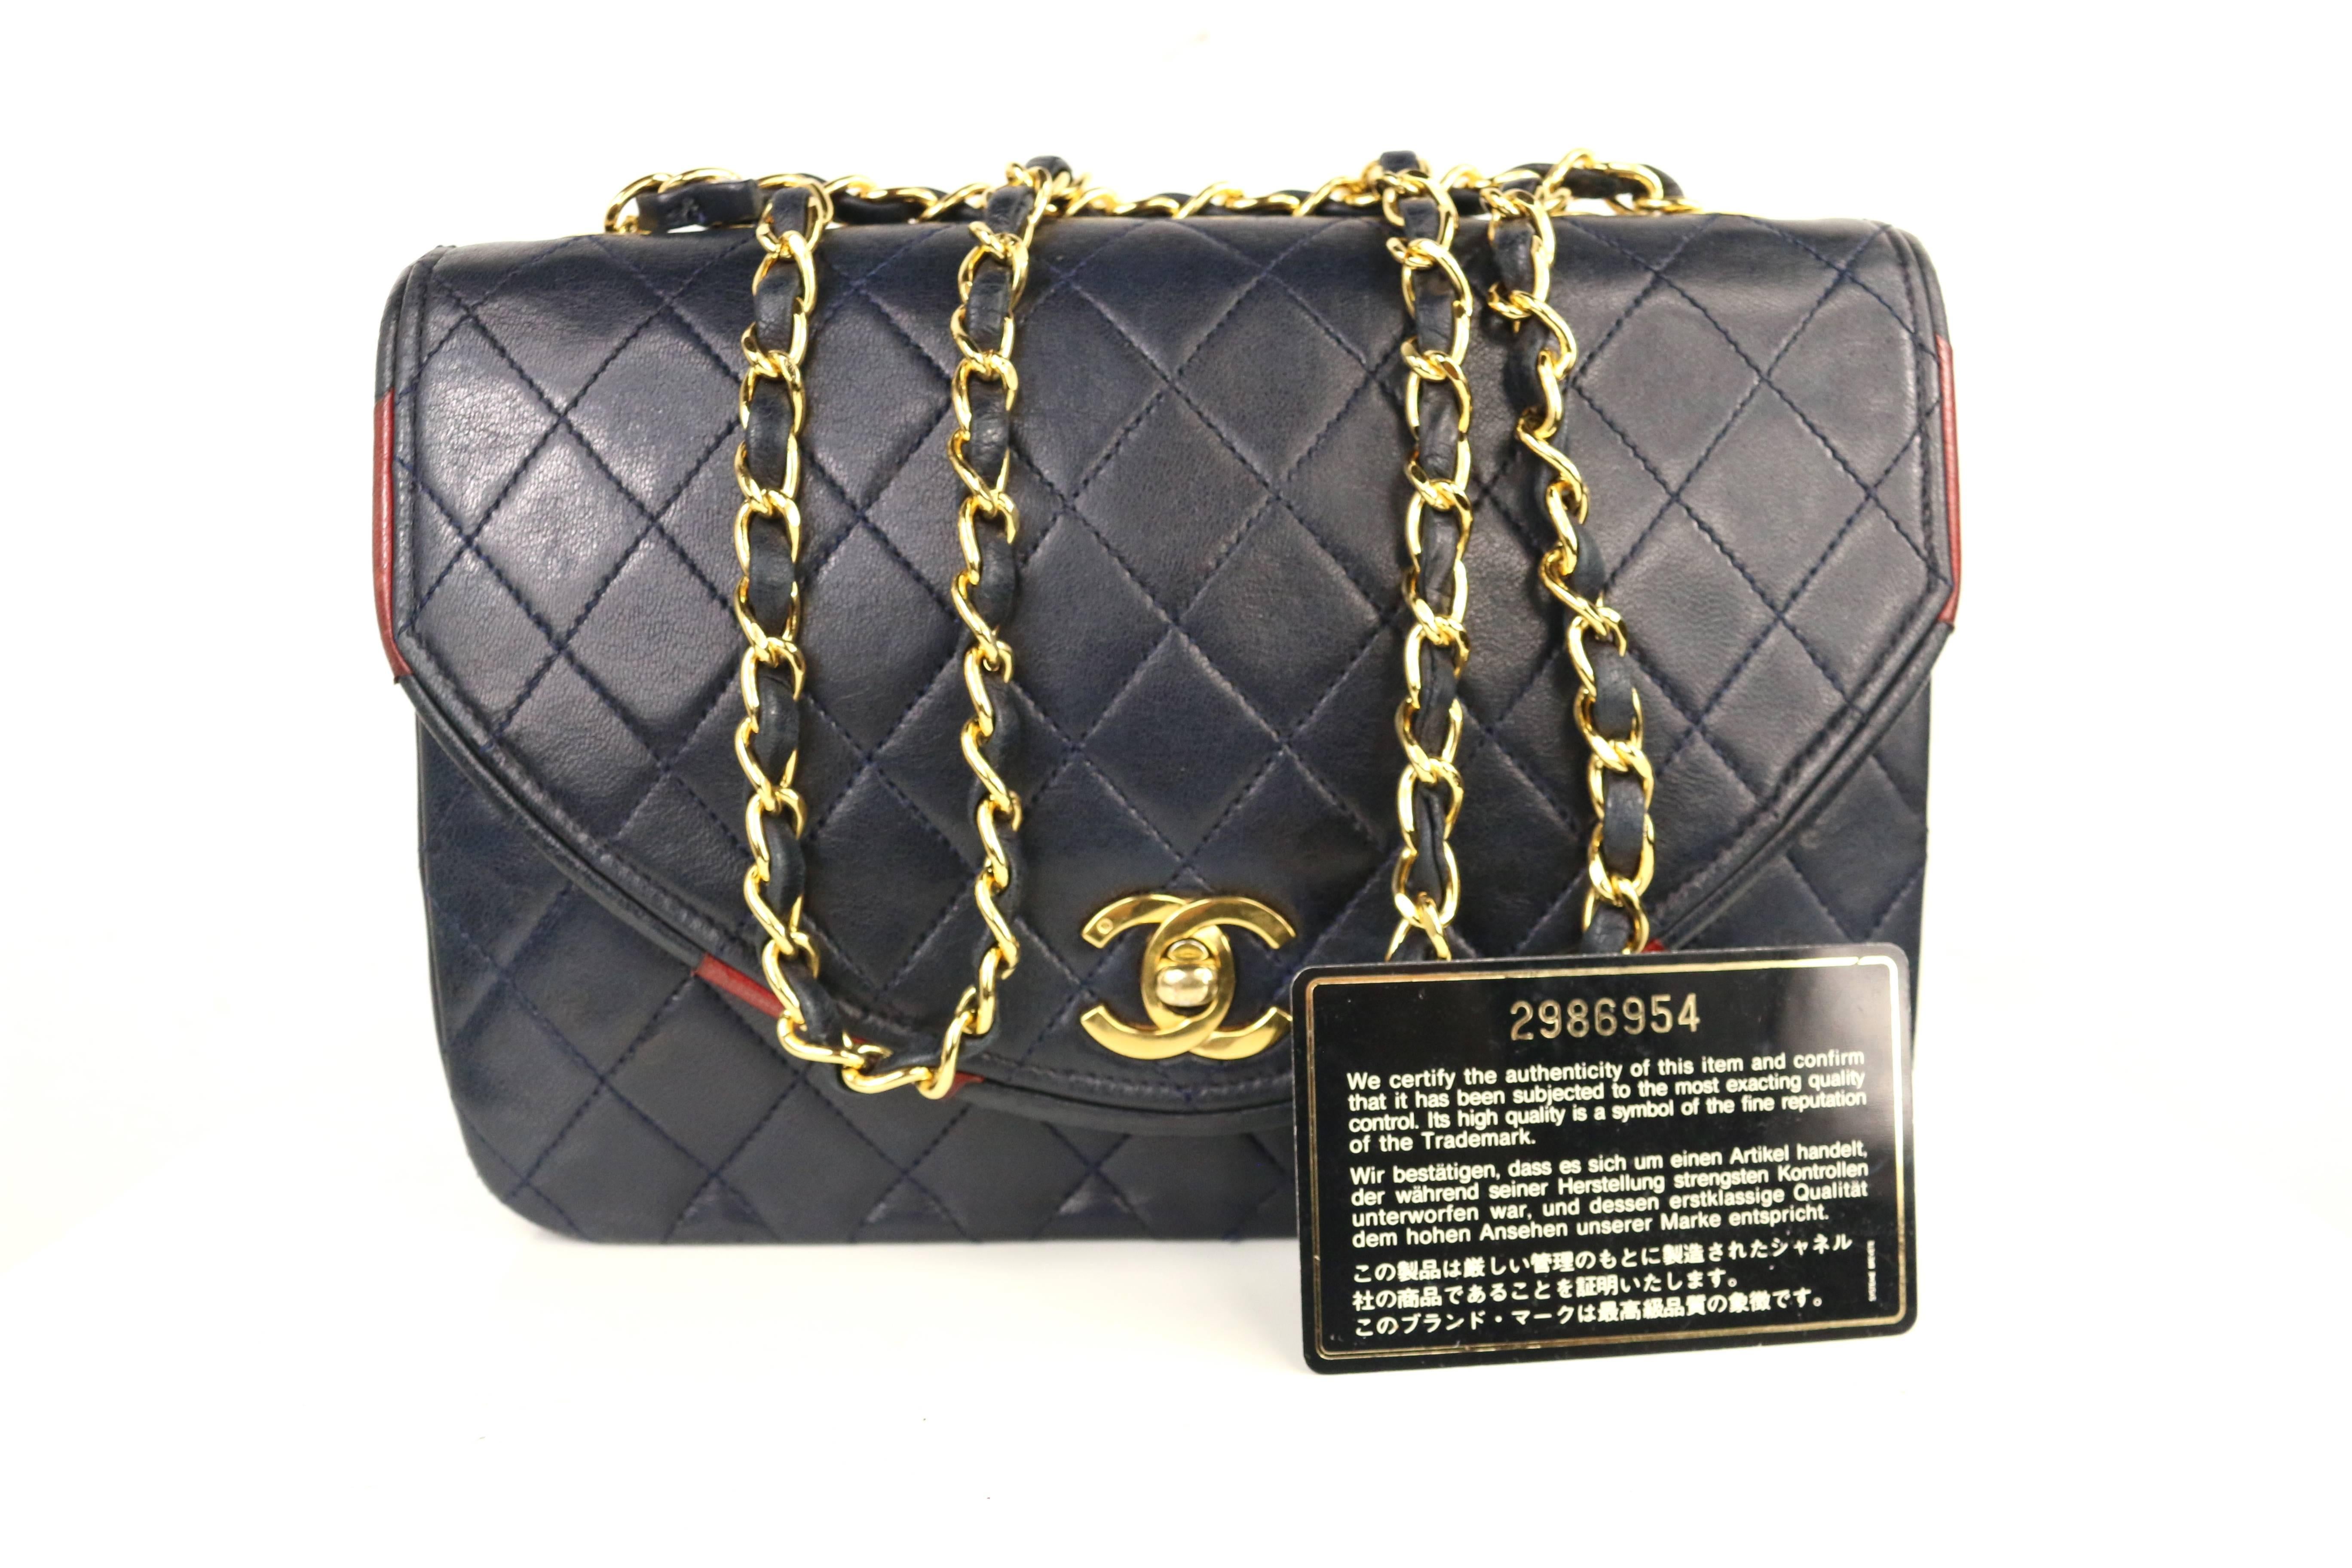 Chanel Classic Navy Quilted Lambskin Leather Red / Navy Trim Flap Shoulder Bag  7